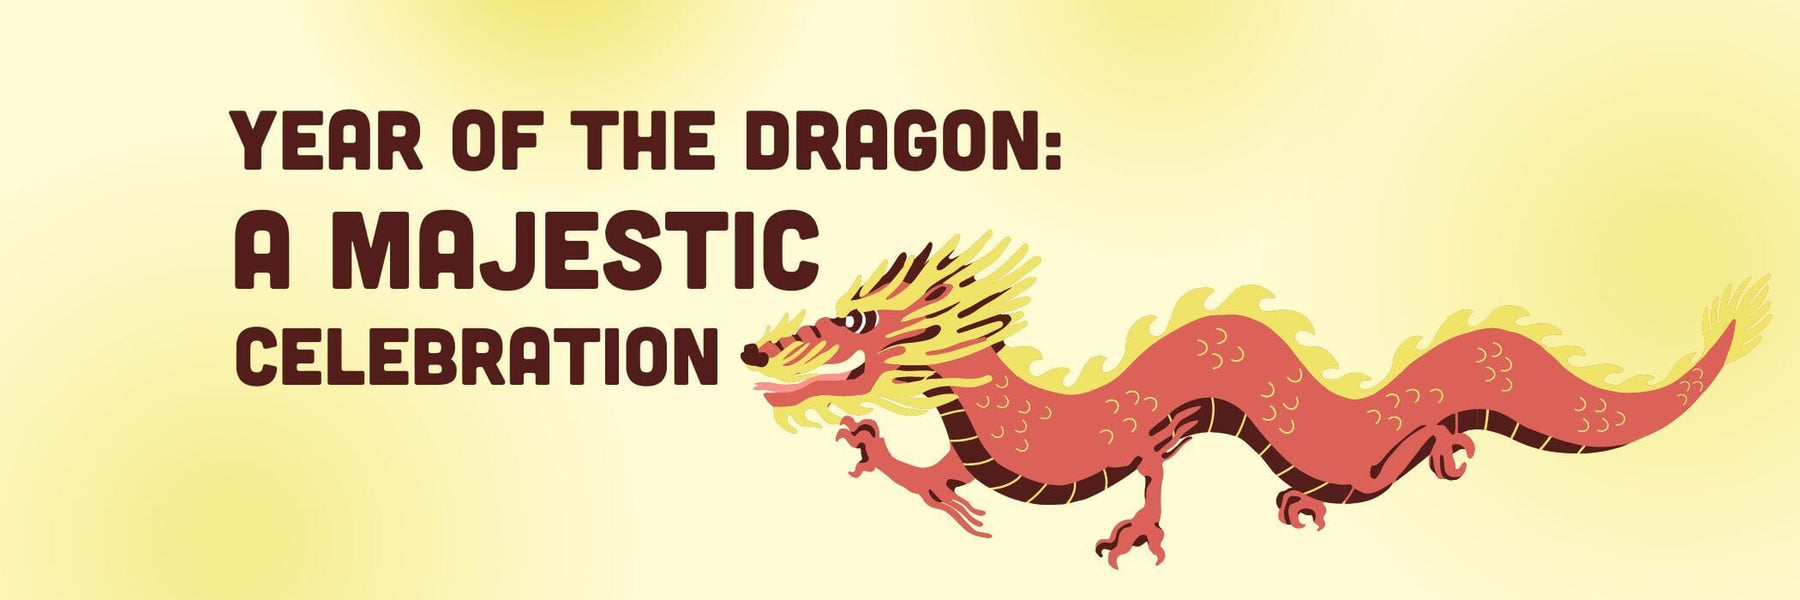 The Year of the Dragon: A Majestic Celebration